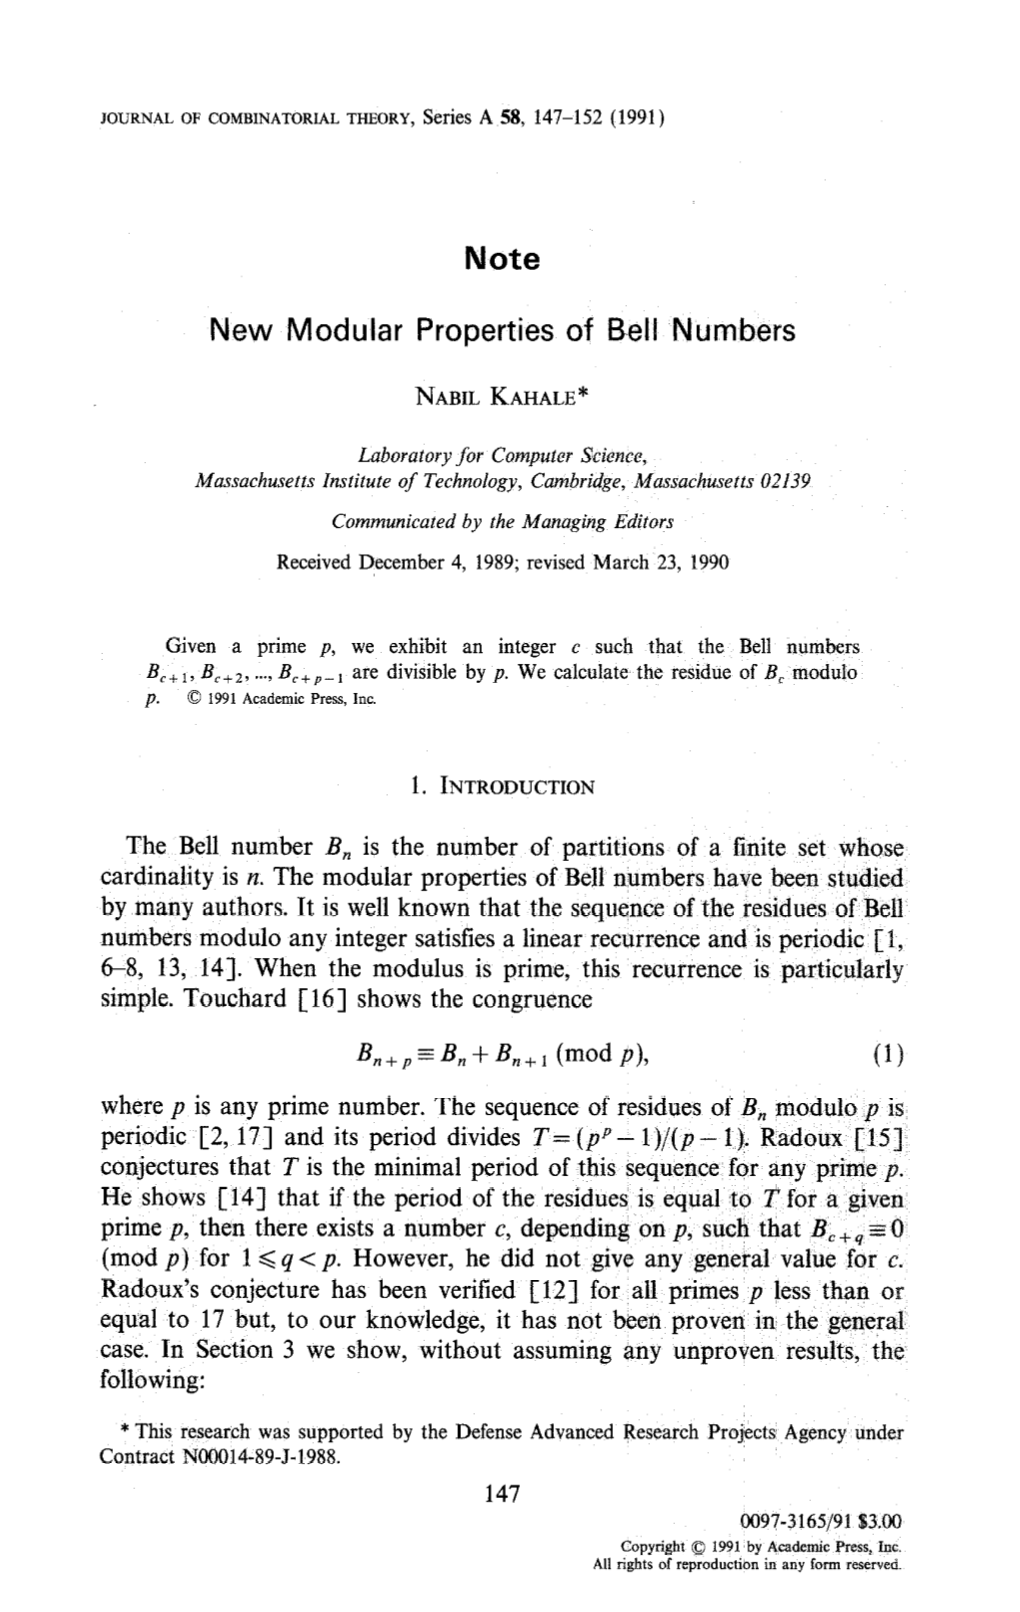 Note New Modular Properties of Bell Numbers